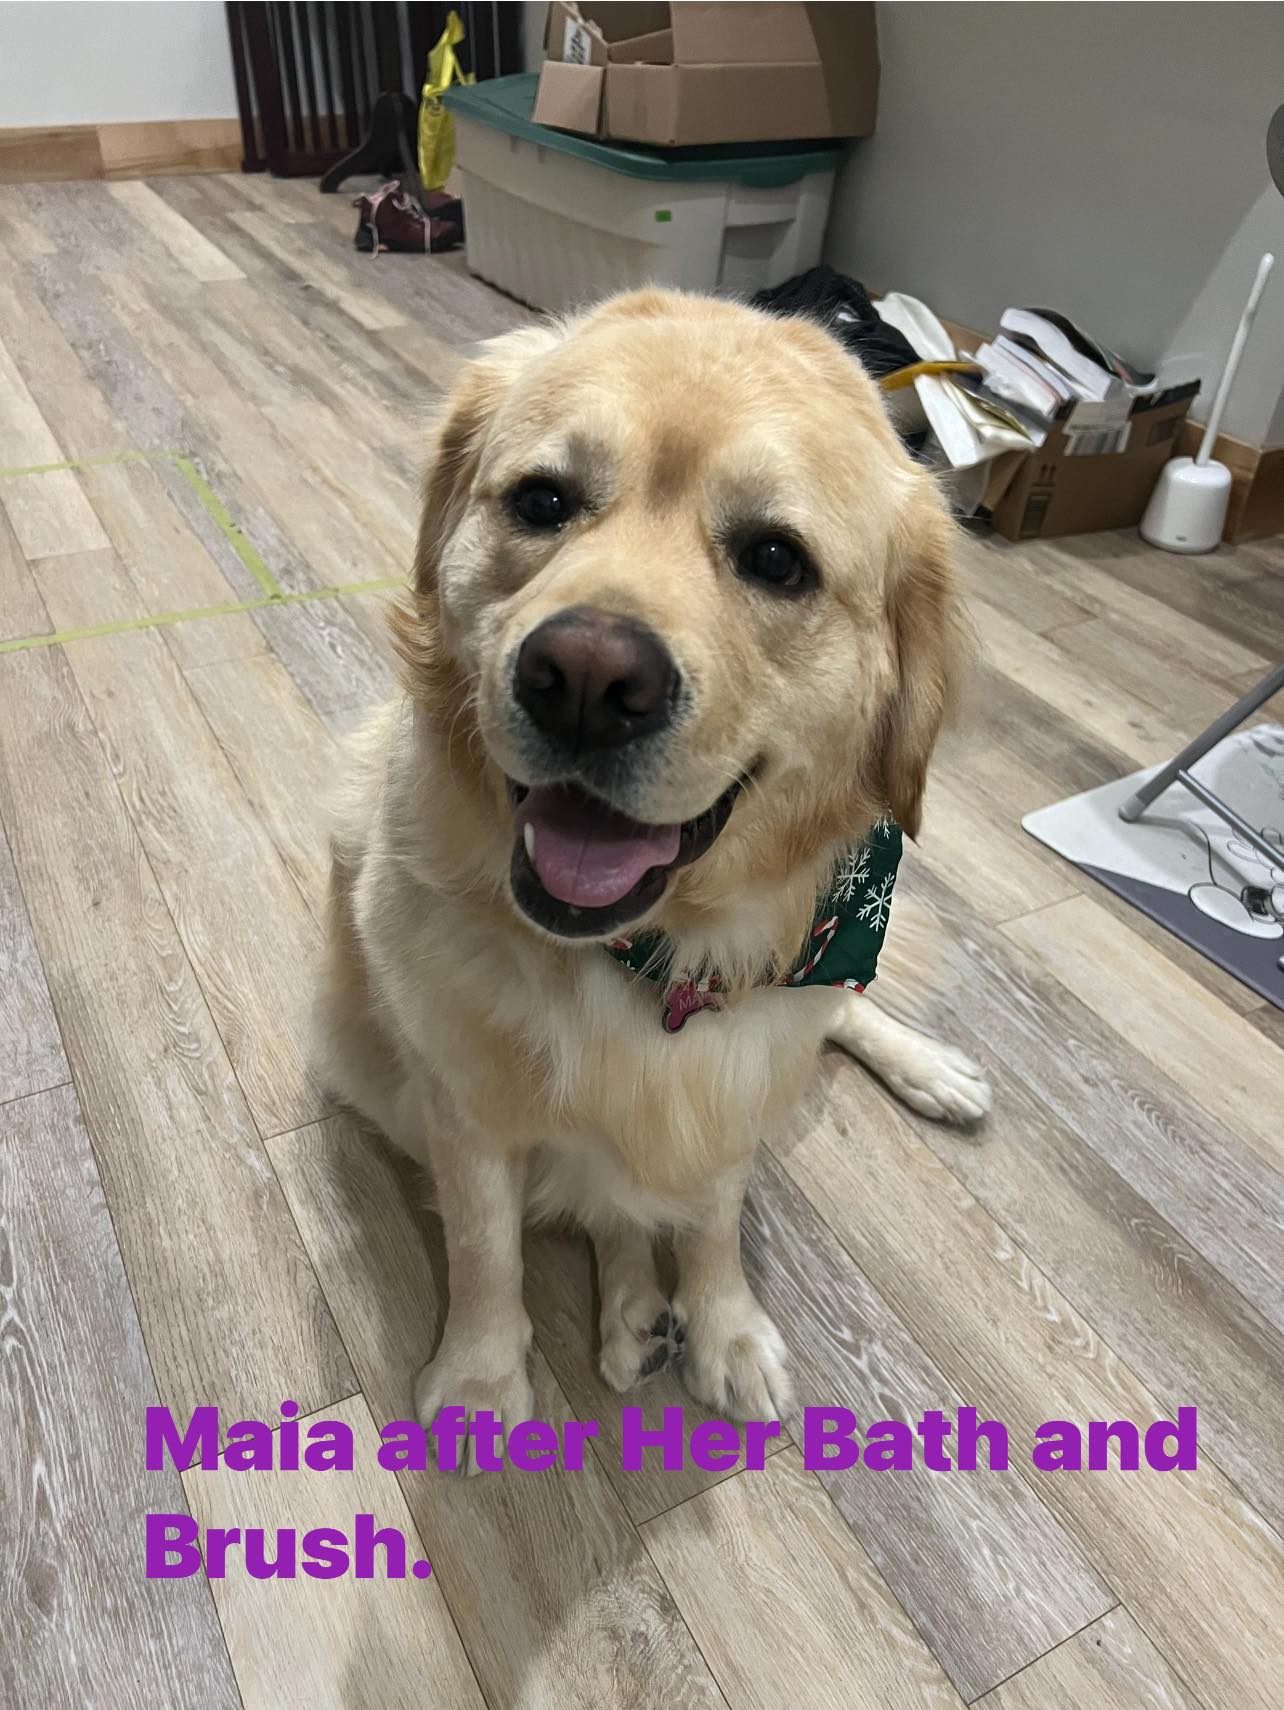 Dog Groom Booking - Bath and Brush ONLY starting at $35 + HST (Cree-Anne )